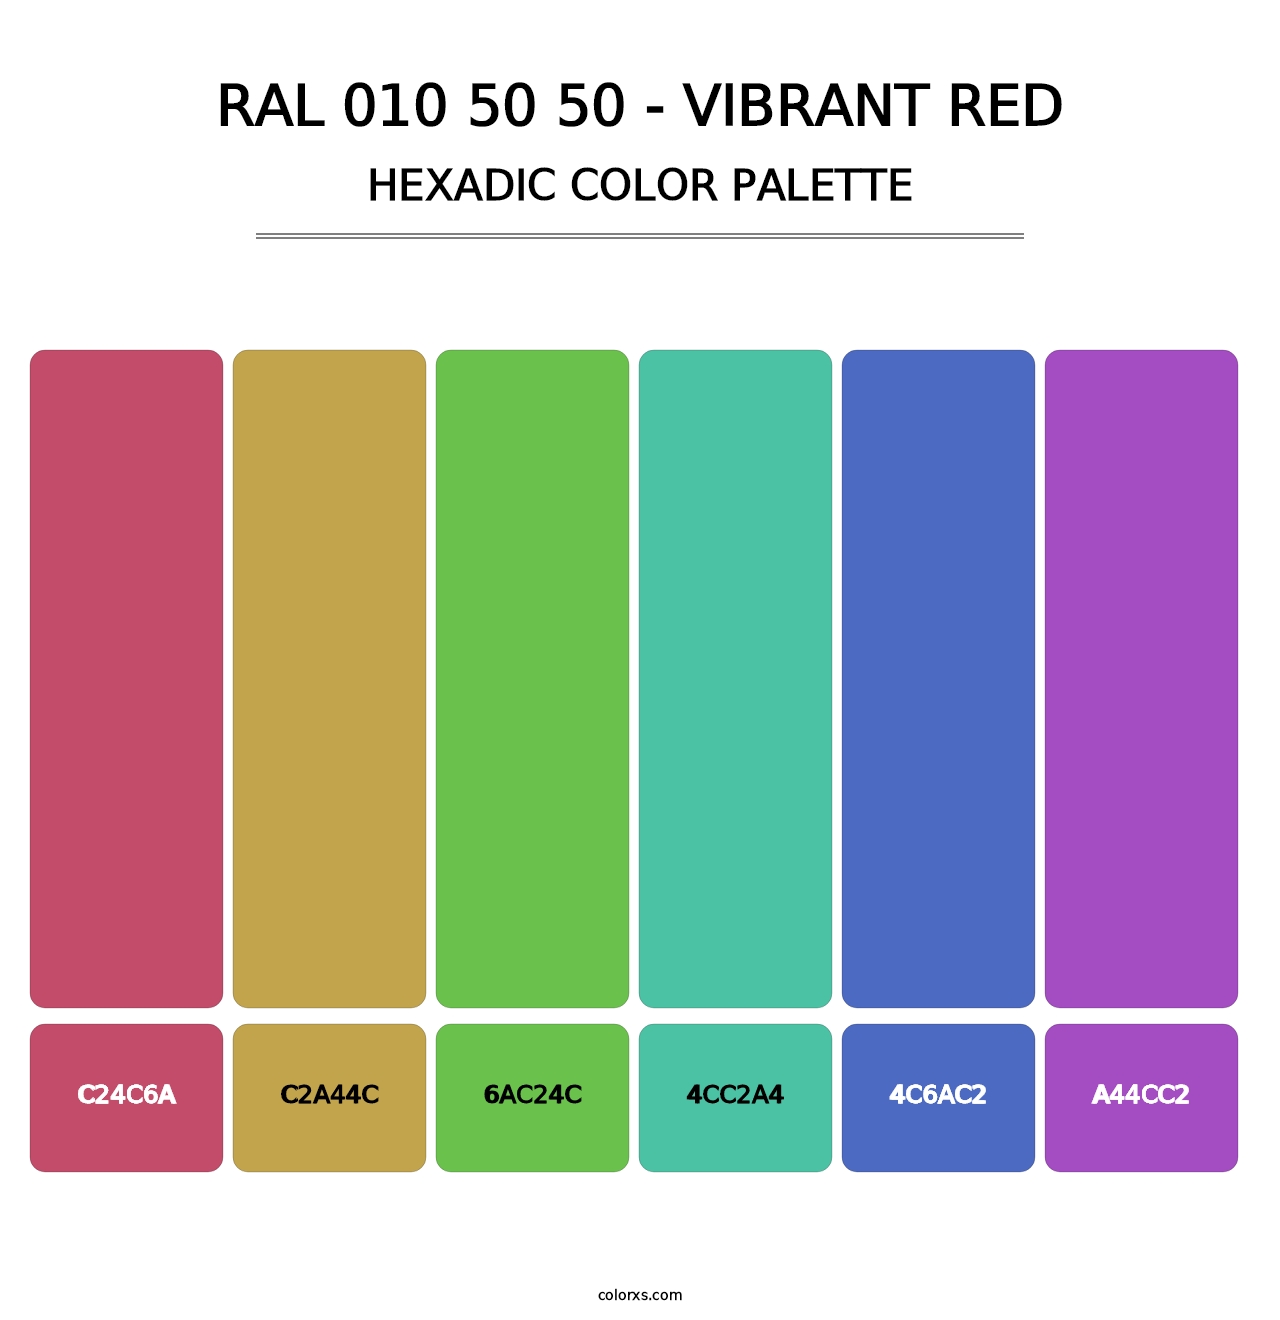 RAL 010 50 50 - Vibrant Red - Hexadic Color Palette